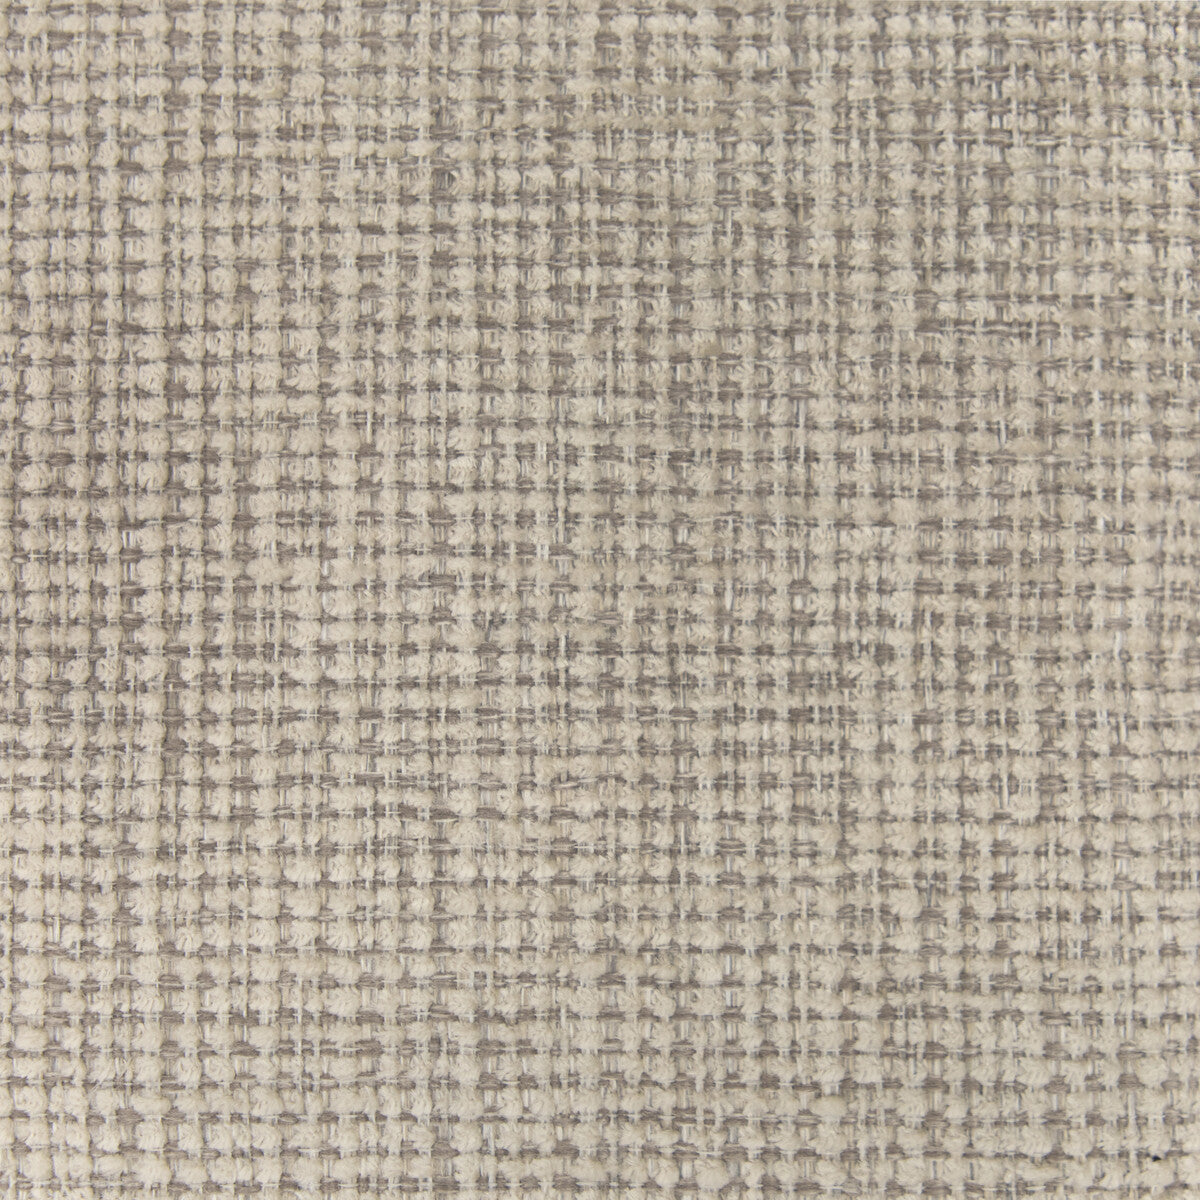 Kravet Smart fabric in 35968-16 color - pattern 35968.16.0 - by Kravet Smart in the Performance Crypton Home collection